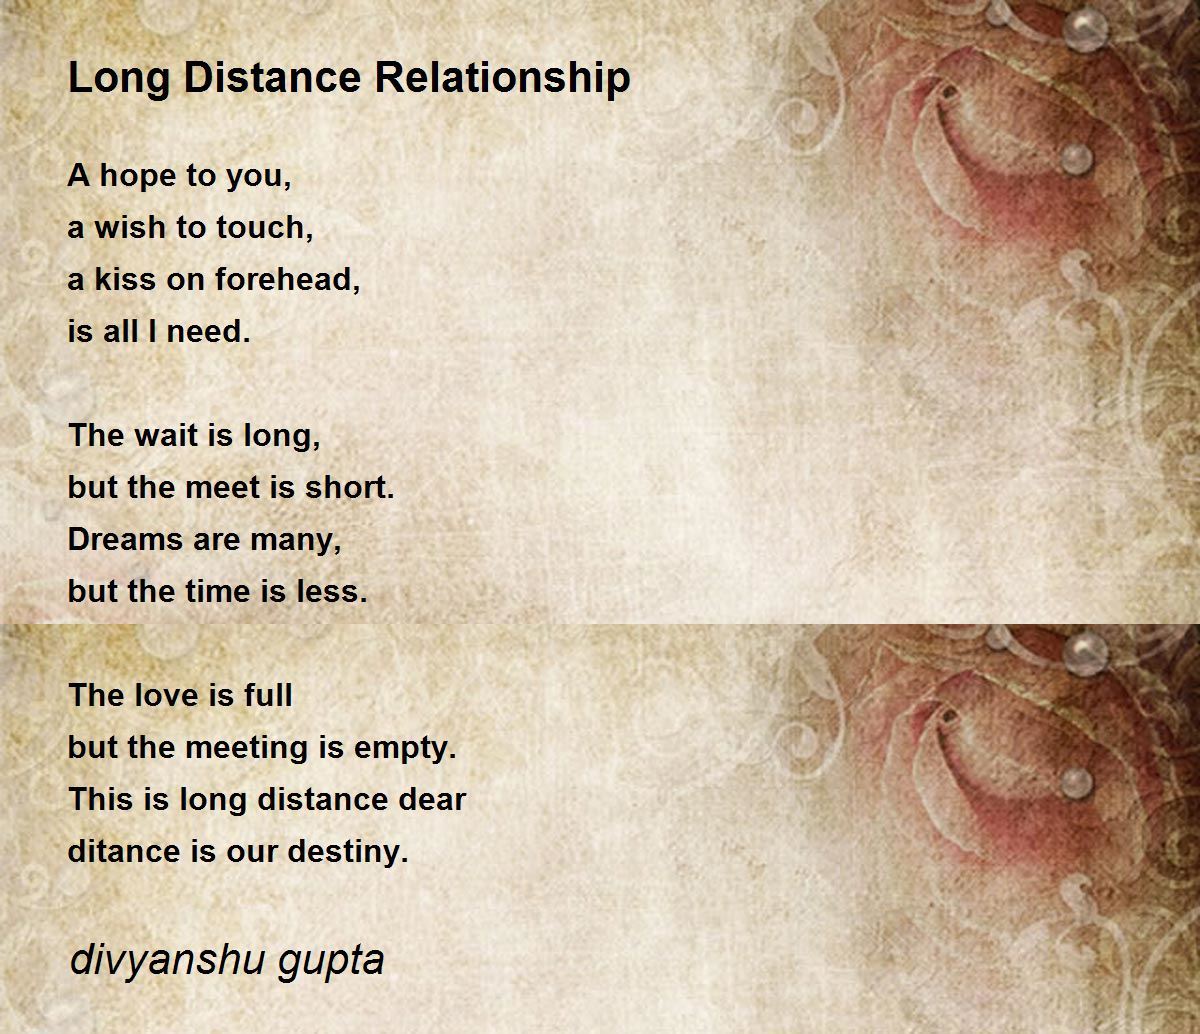 research paper on long distance relationship